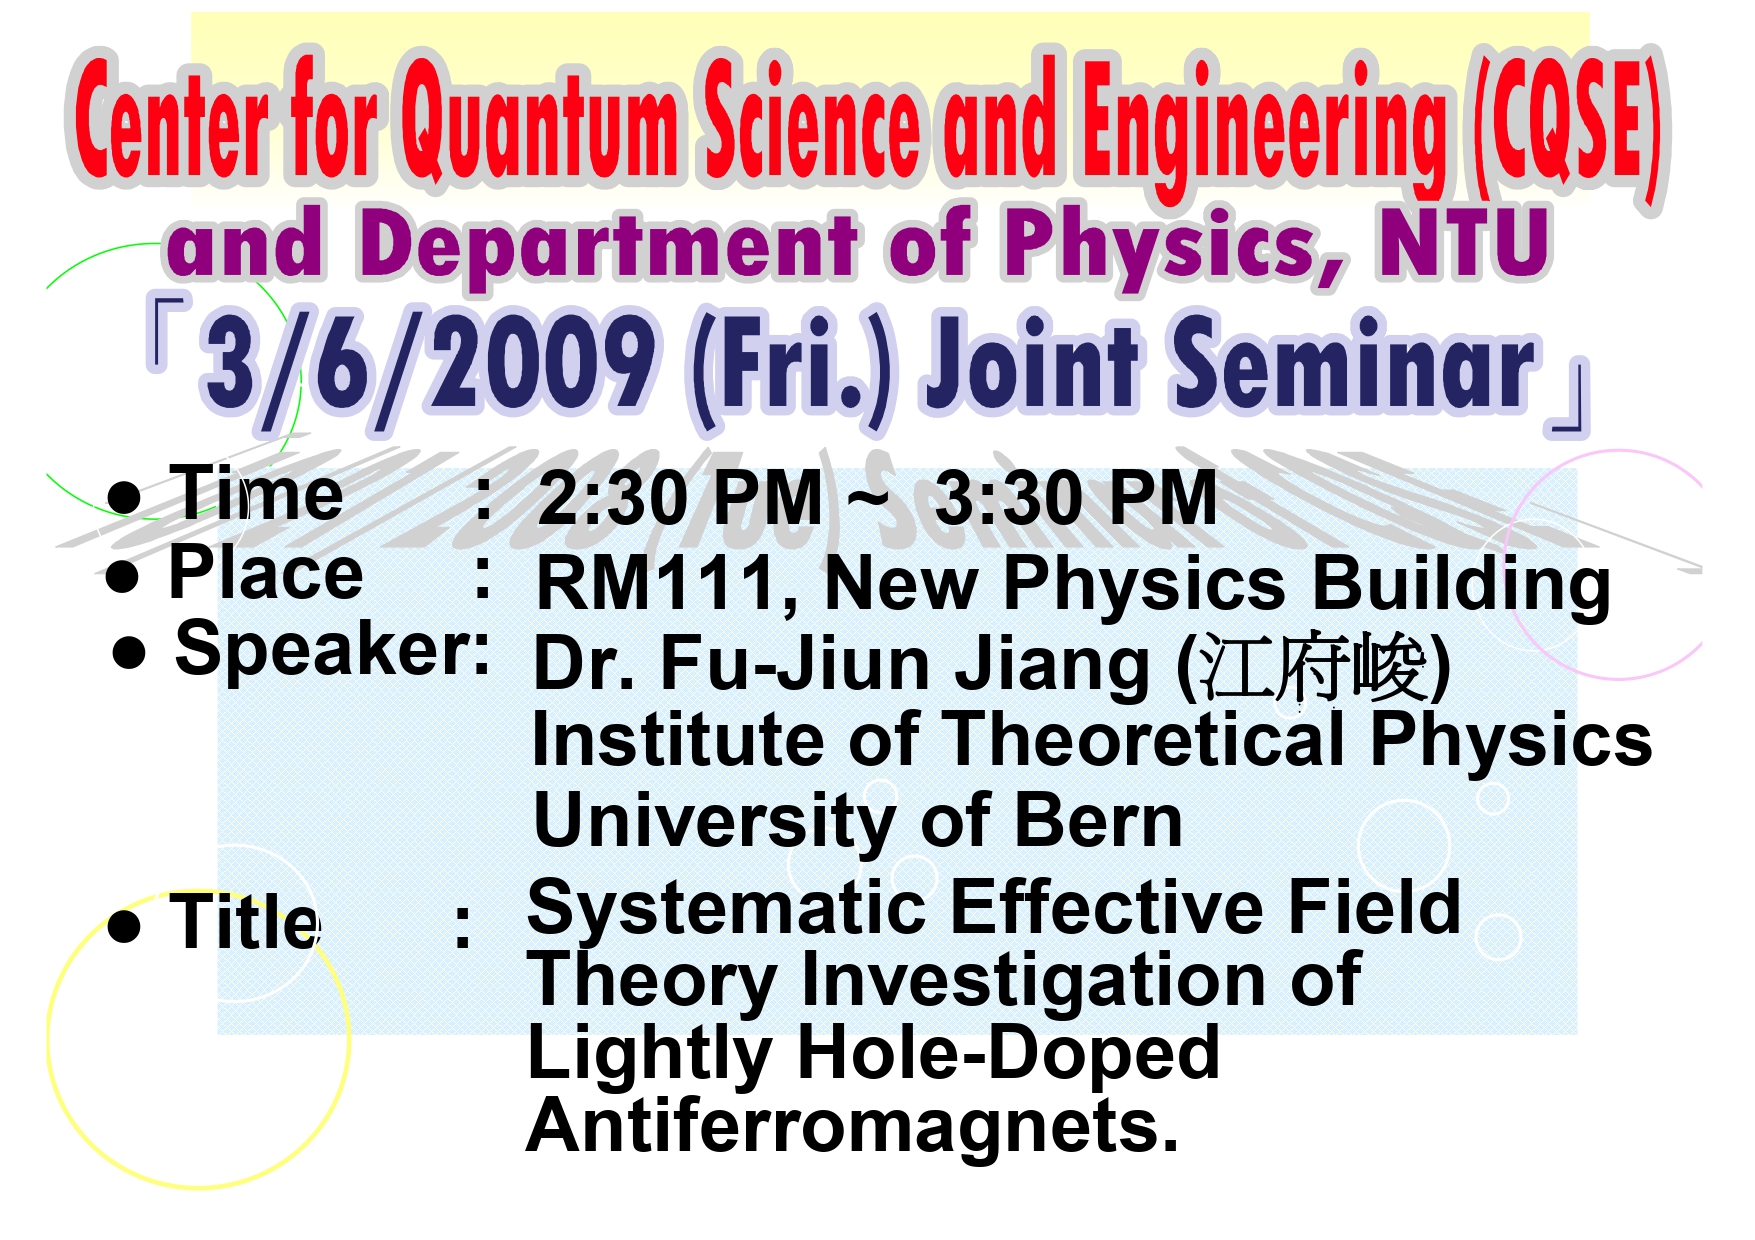 Joint Seminar of Center for Quantum Science and Engineering (CQSE) and Dept. of Physics, NTU